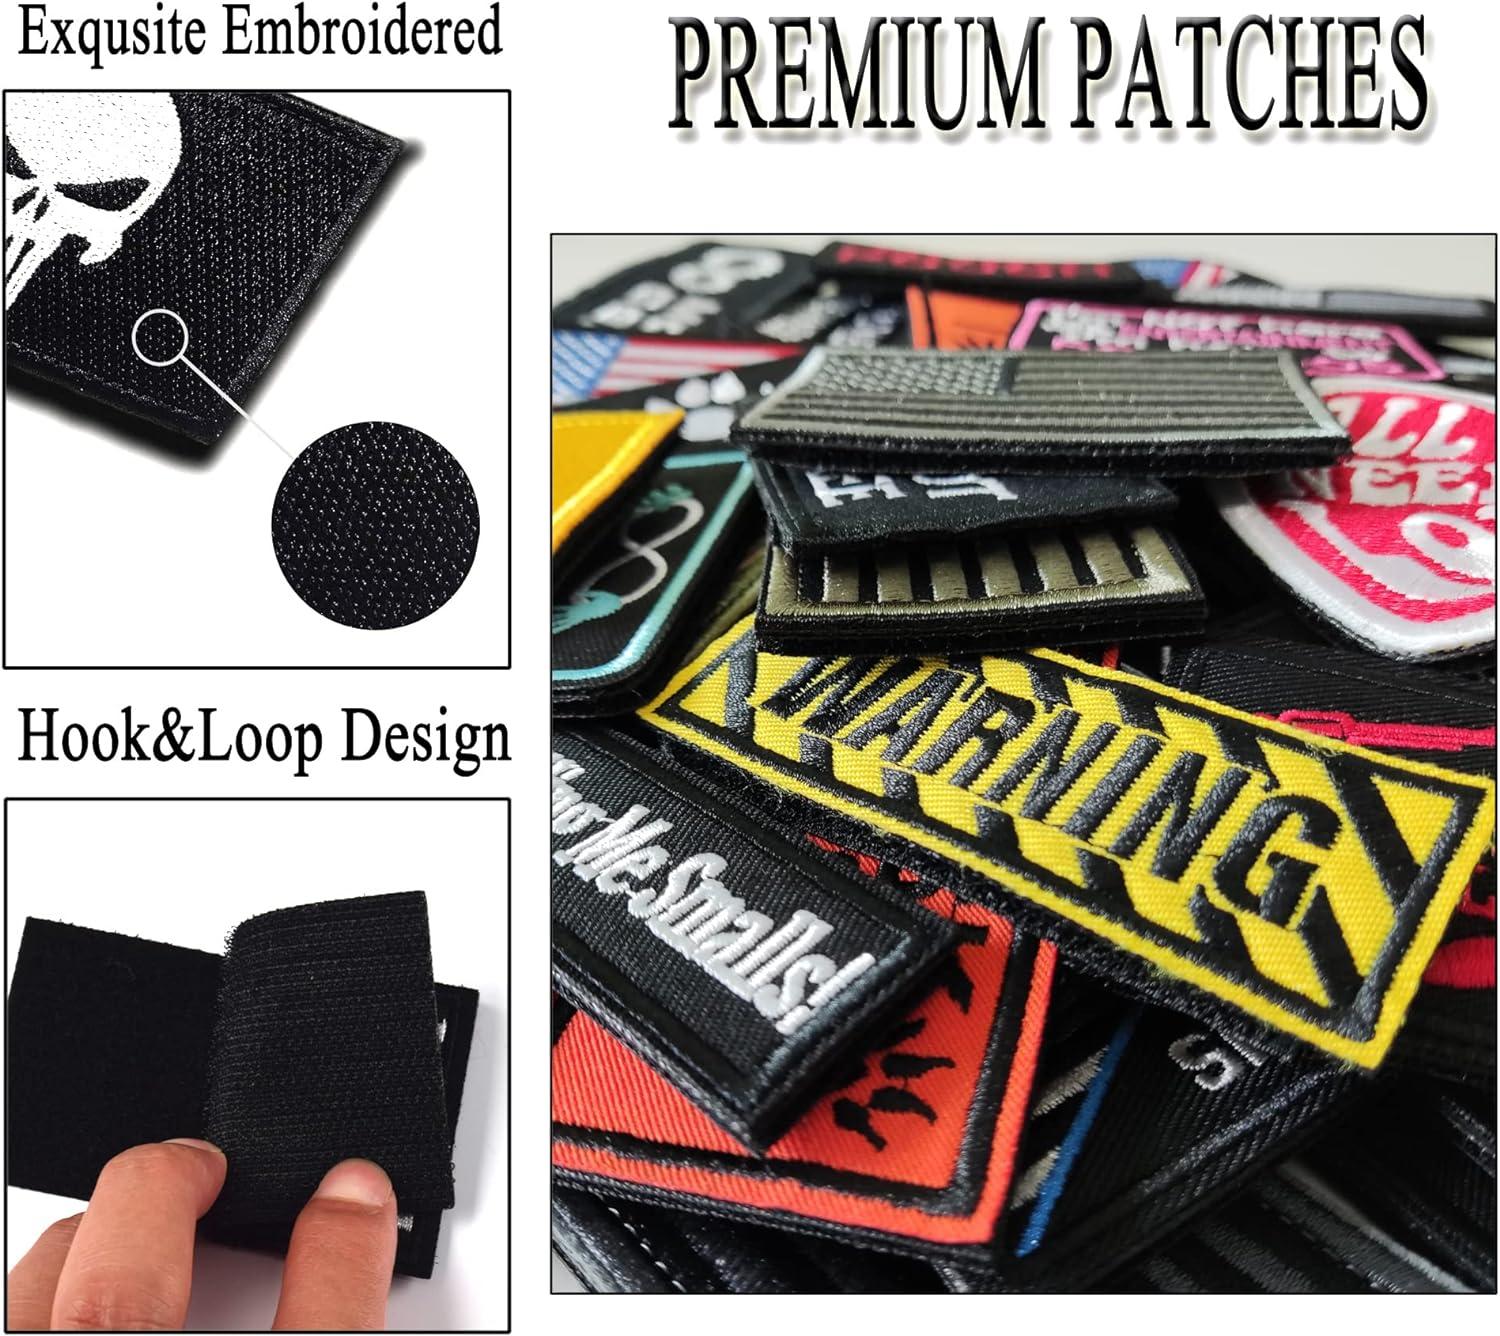 Harsgs 20 Pieces Random Tactical Morale Patch Bundle, Full Embroidery Loop  and Hook Patches Set for Caps, Bags, Backpacks, Vest, Military